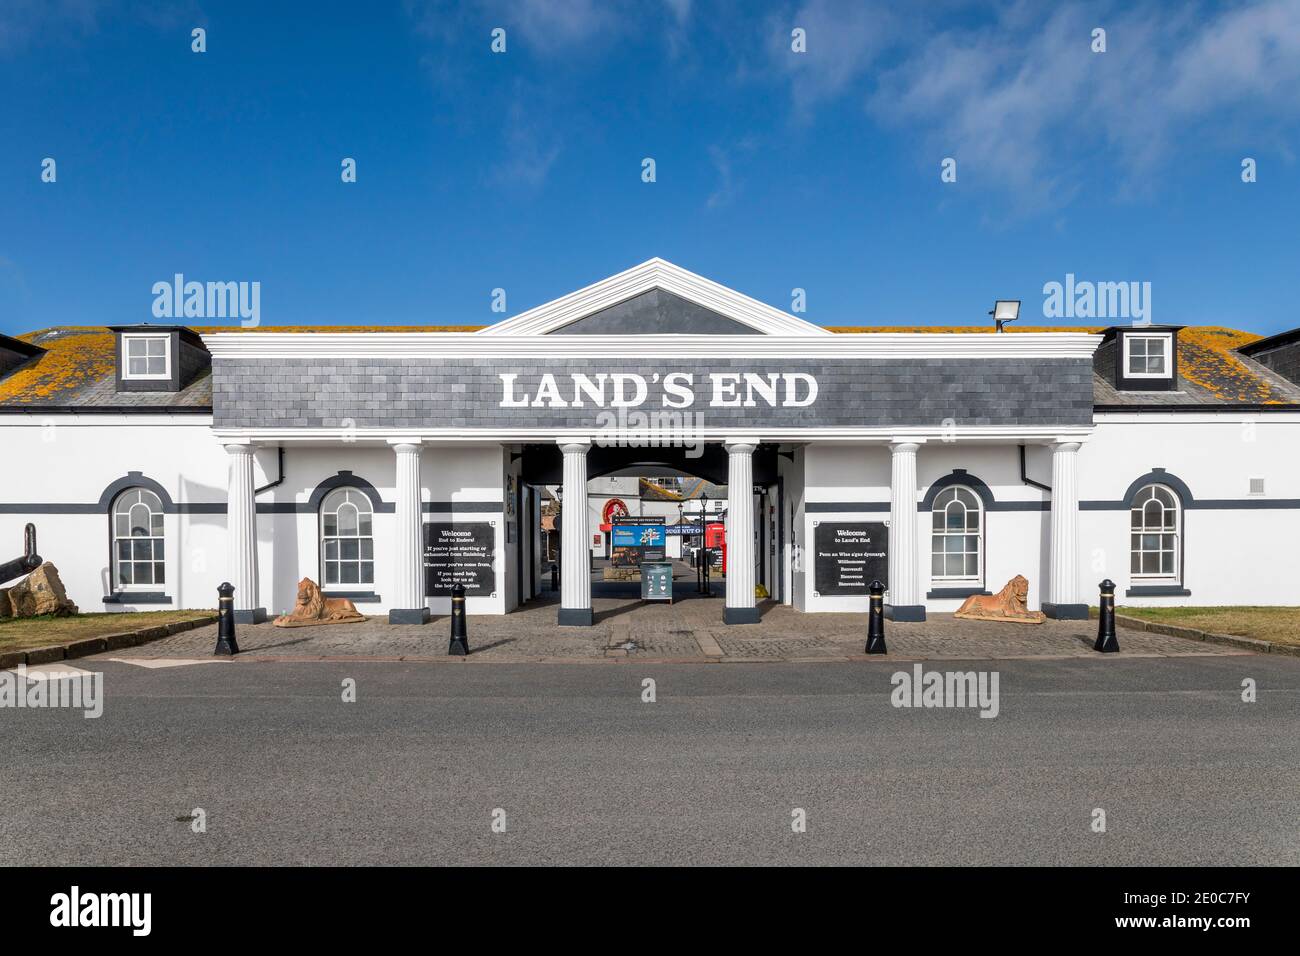 Land's End ; Attraction ; Cornwall, UK Banque D'Images